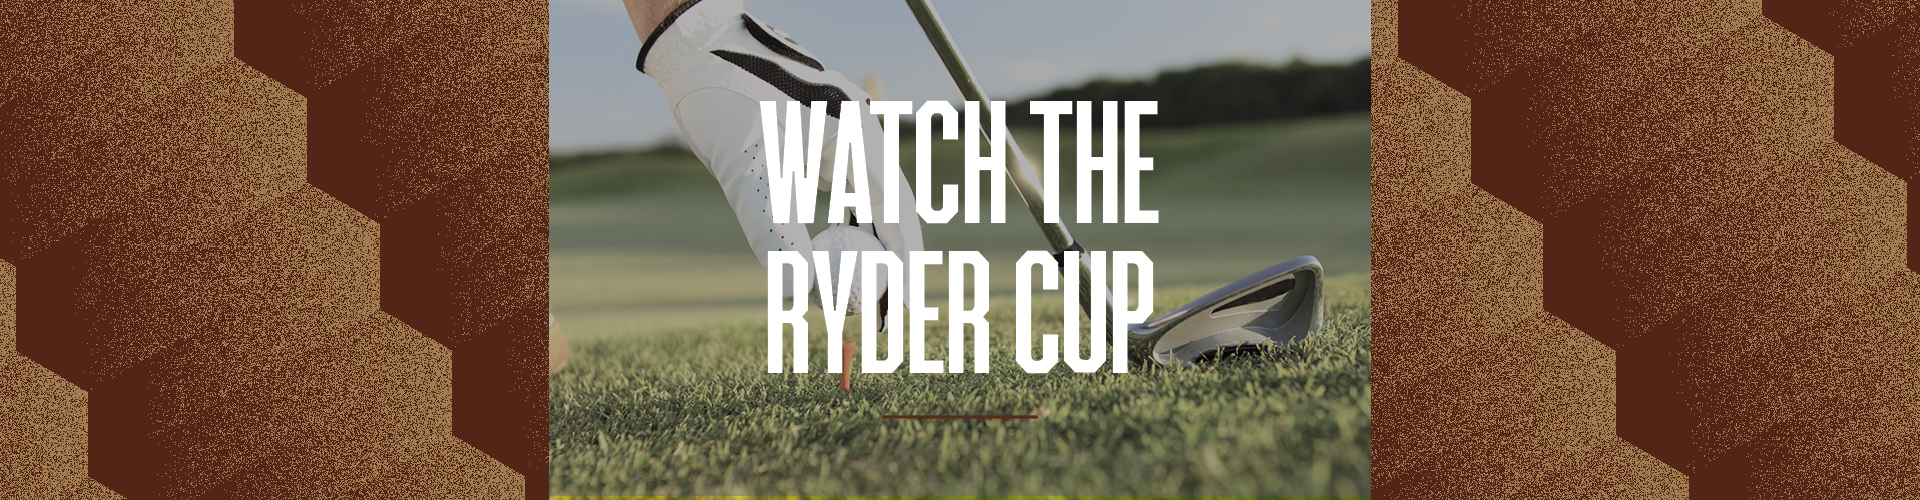 Watch the Ryder Cup in Soho